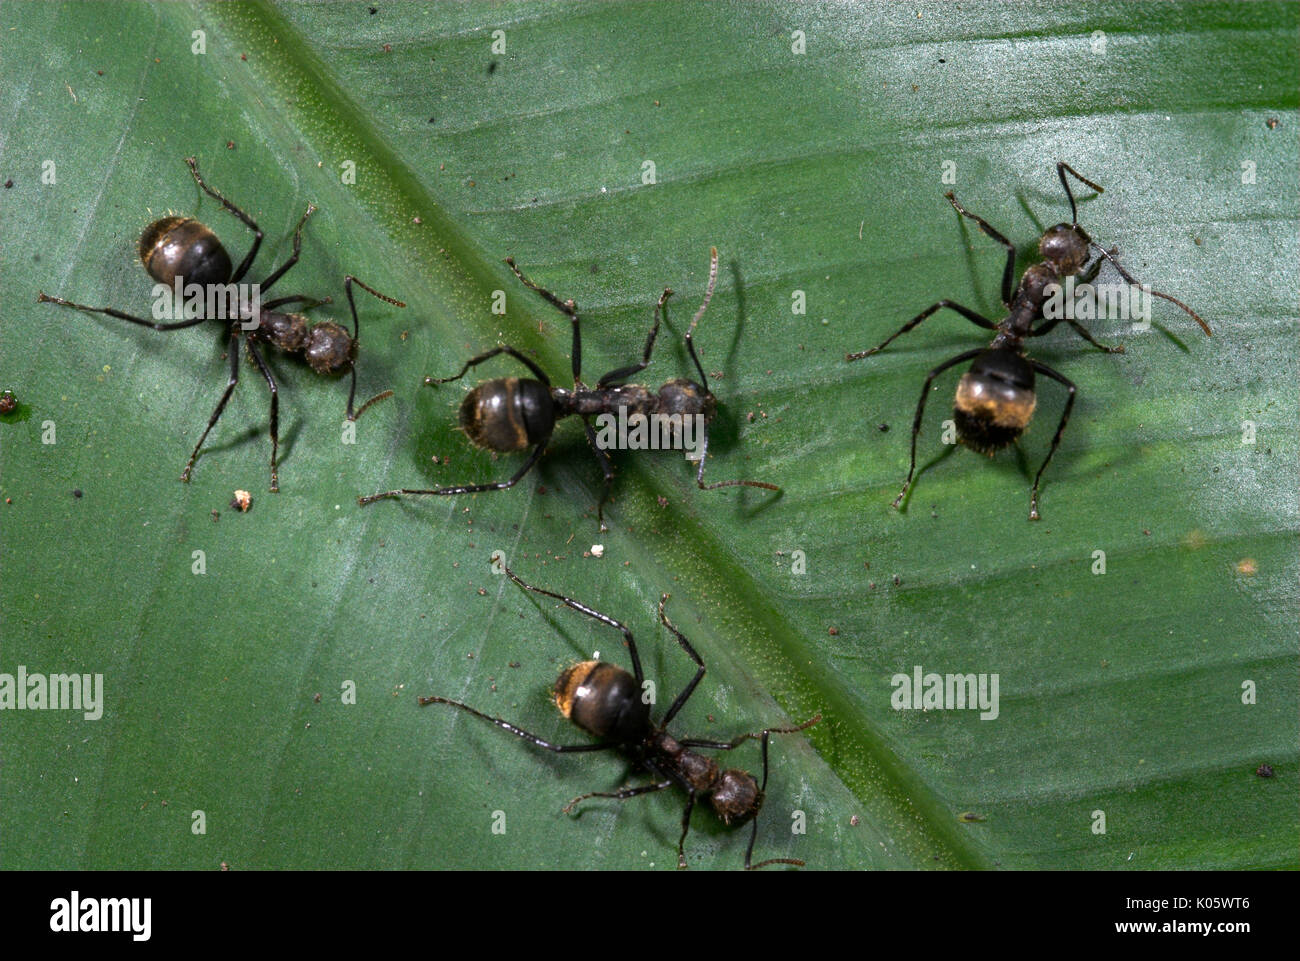 Group Of Ants On Leaf Dolichoderus Sp Amazon Rainforest Iquitos Stock Photo Alamy